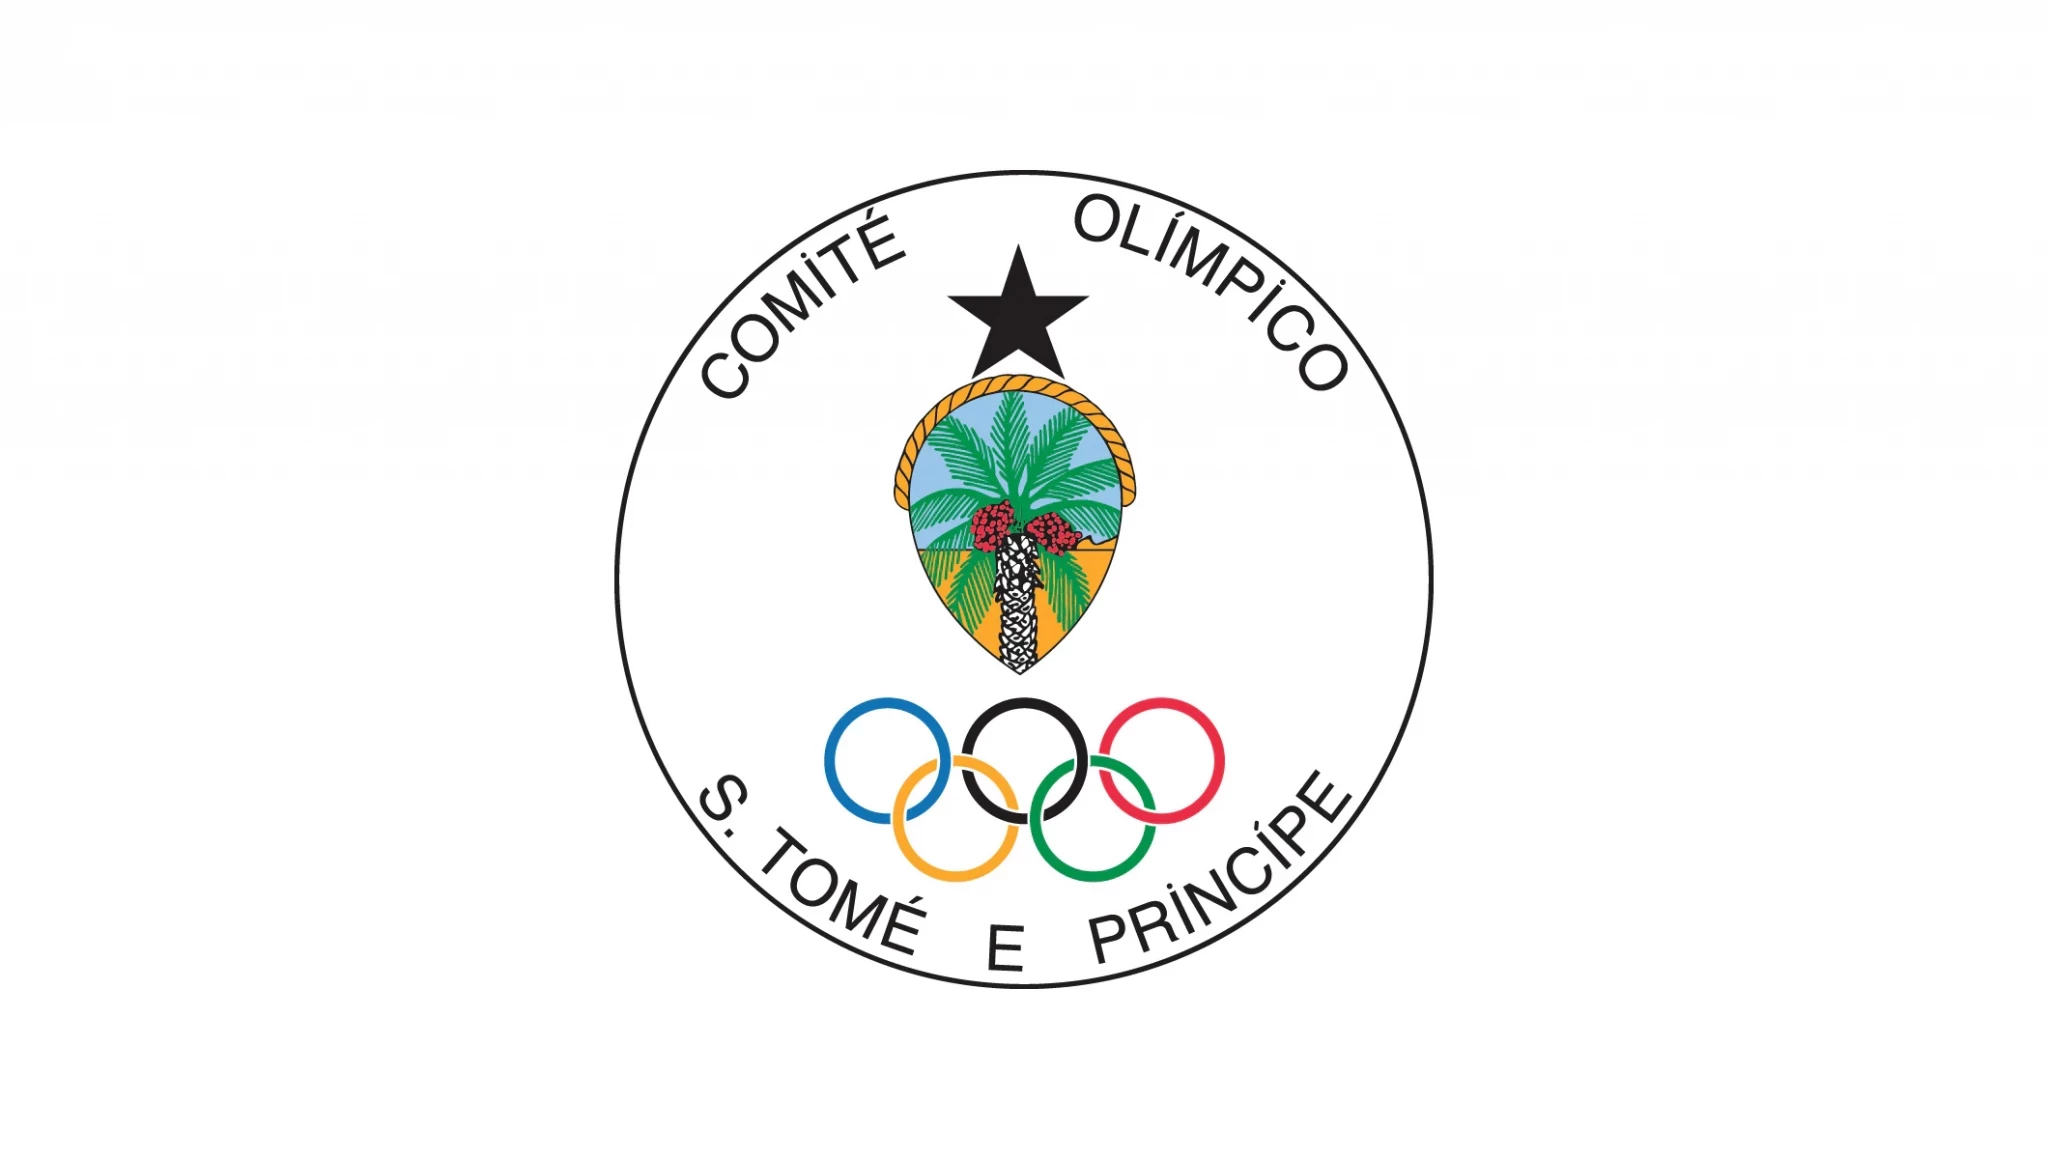 The São Tomé and Príncipe National Olympic Committee held a video conference to discuss the COVID-19 response ©COSTP